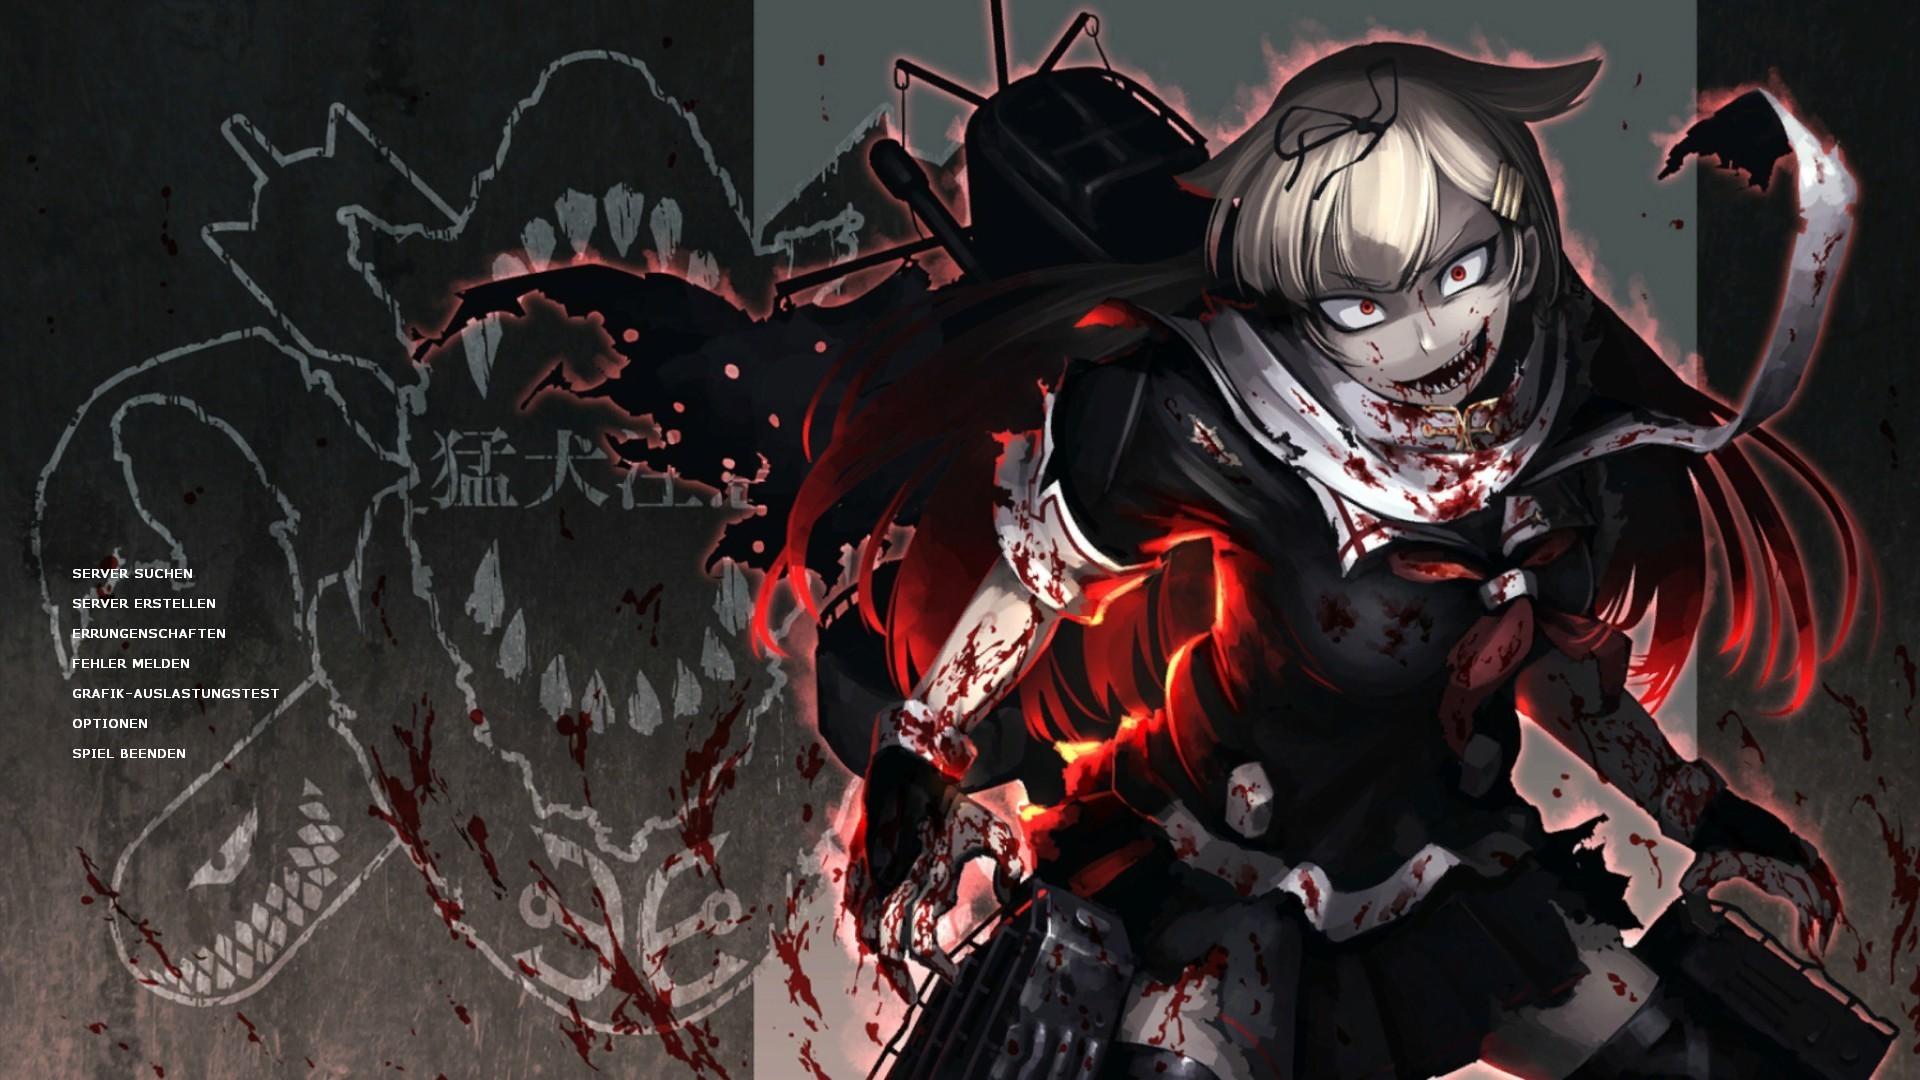 Wallpaper Crazy anime girl knife blood 1920x1200 HD Picture Image